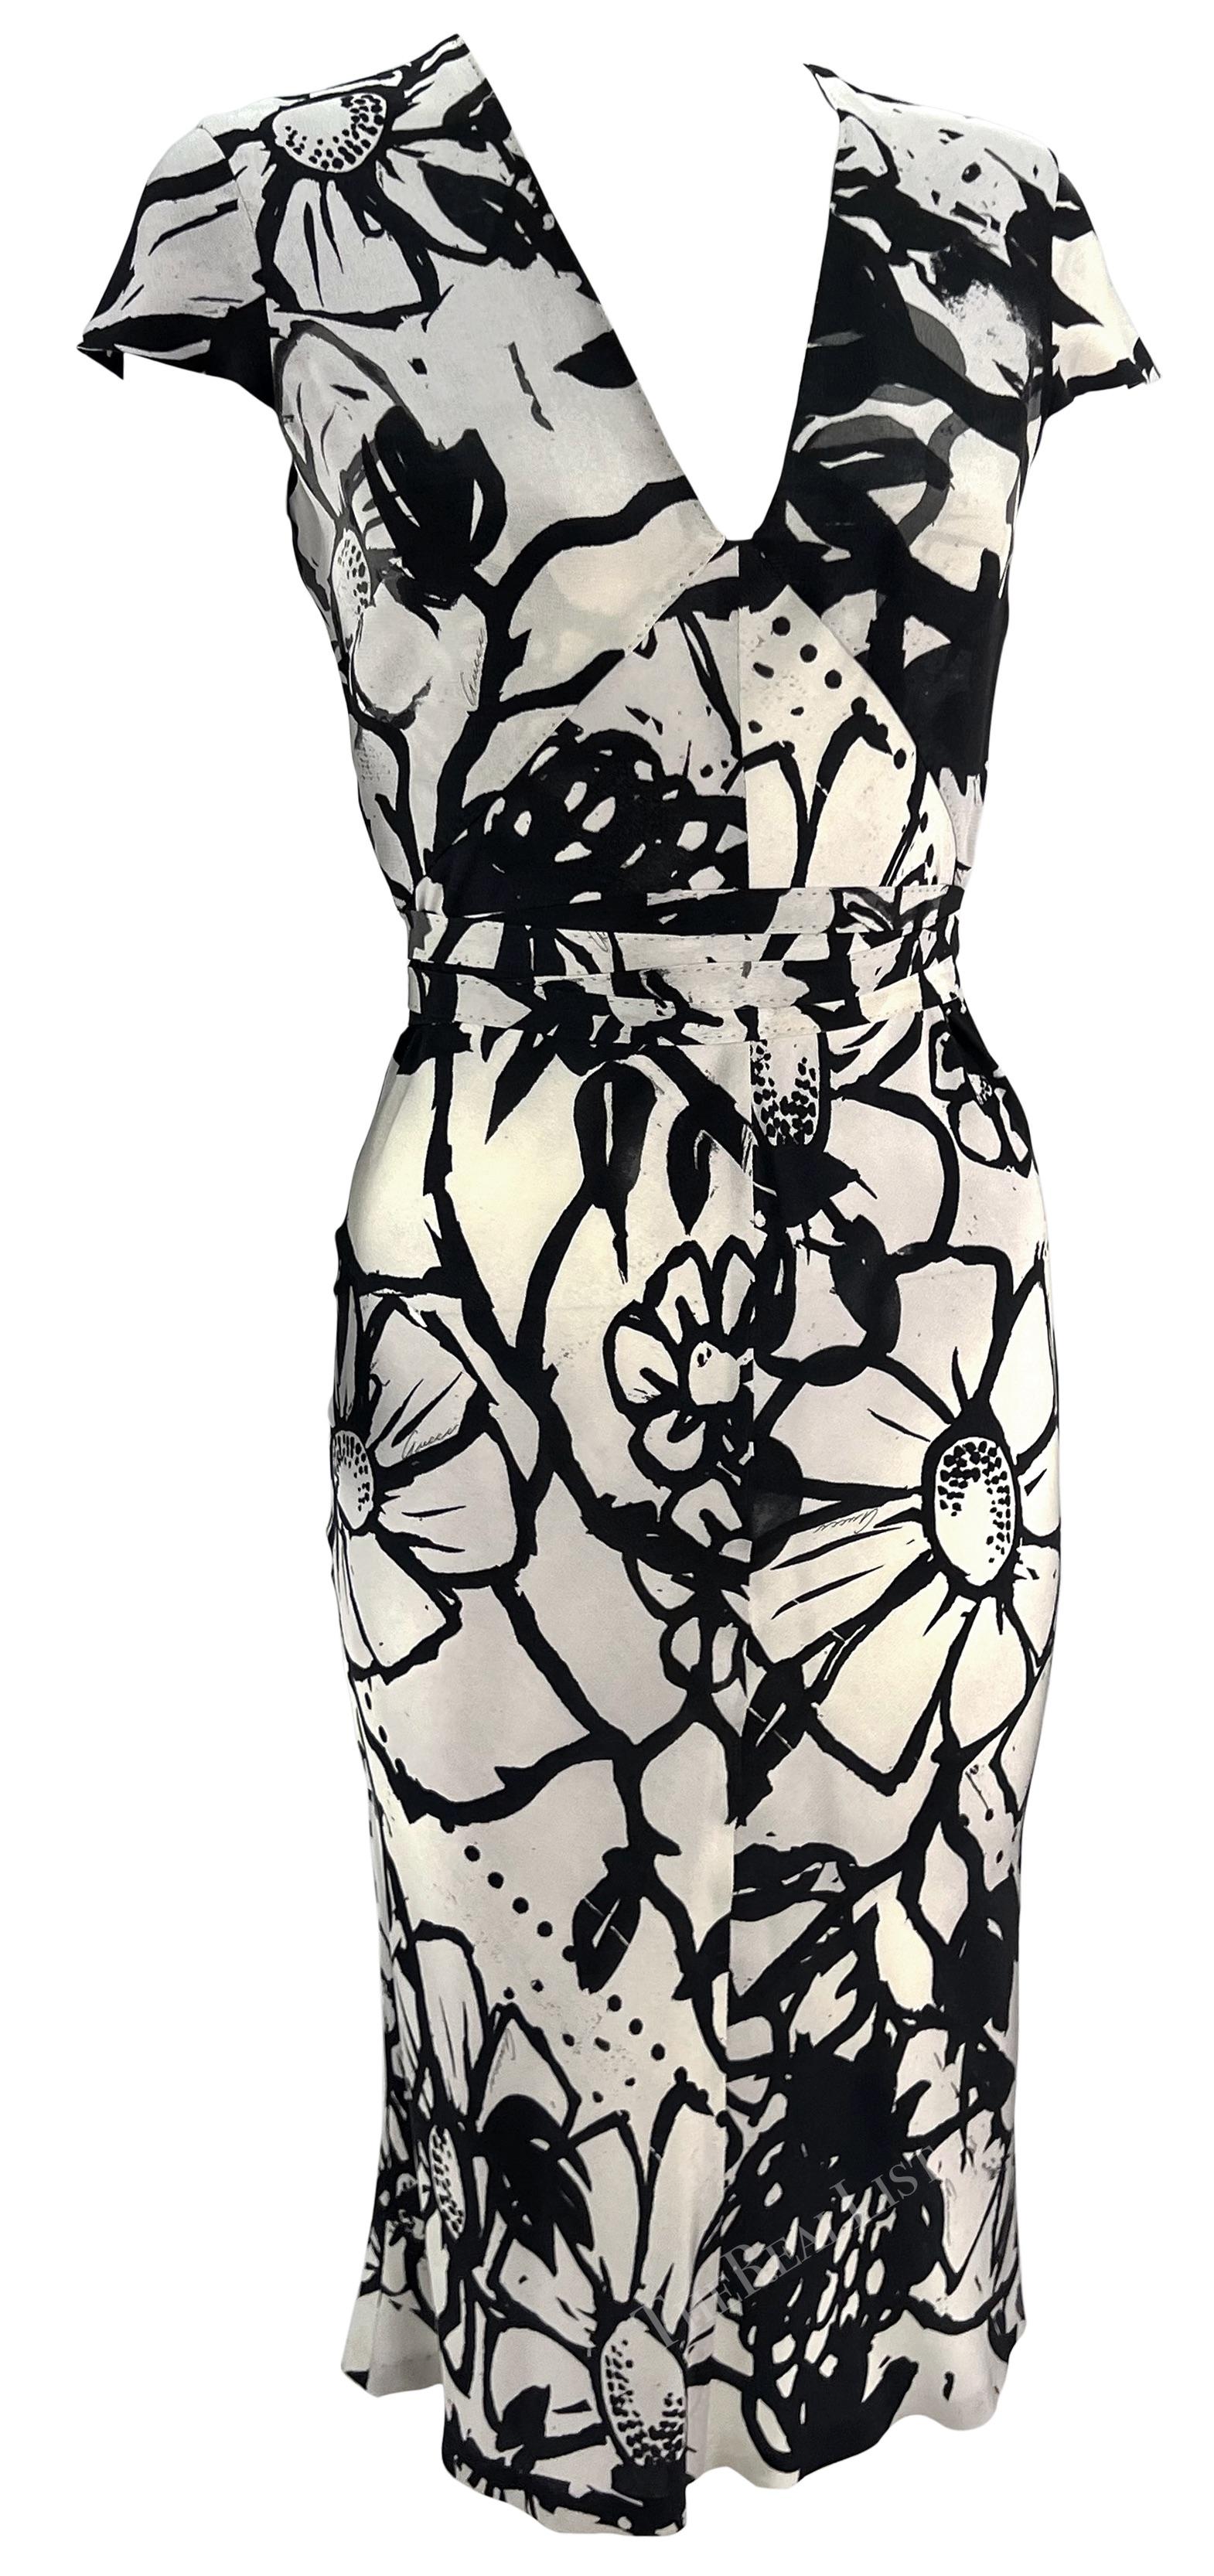 2003 Gucci by Tom Ford Grey Silk Floral Print Tie Dress For Sale 3